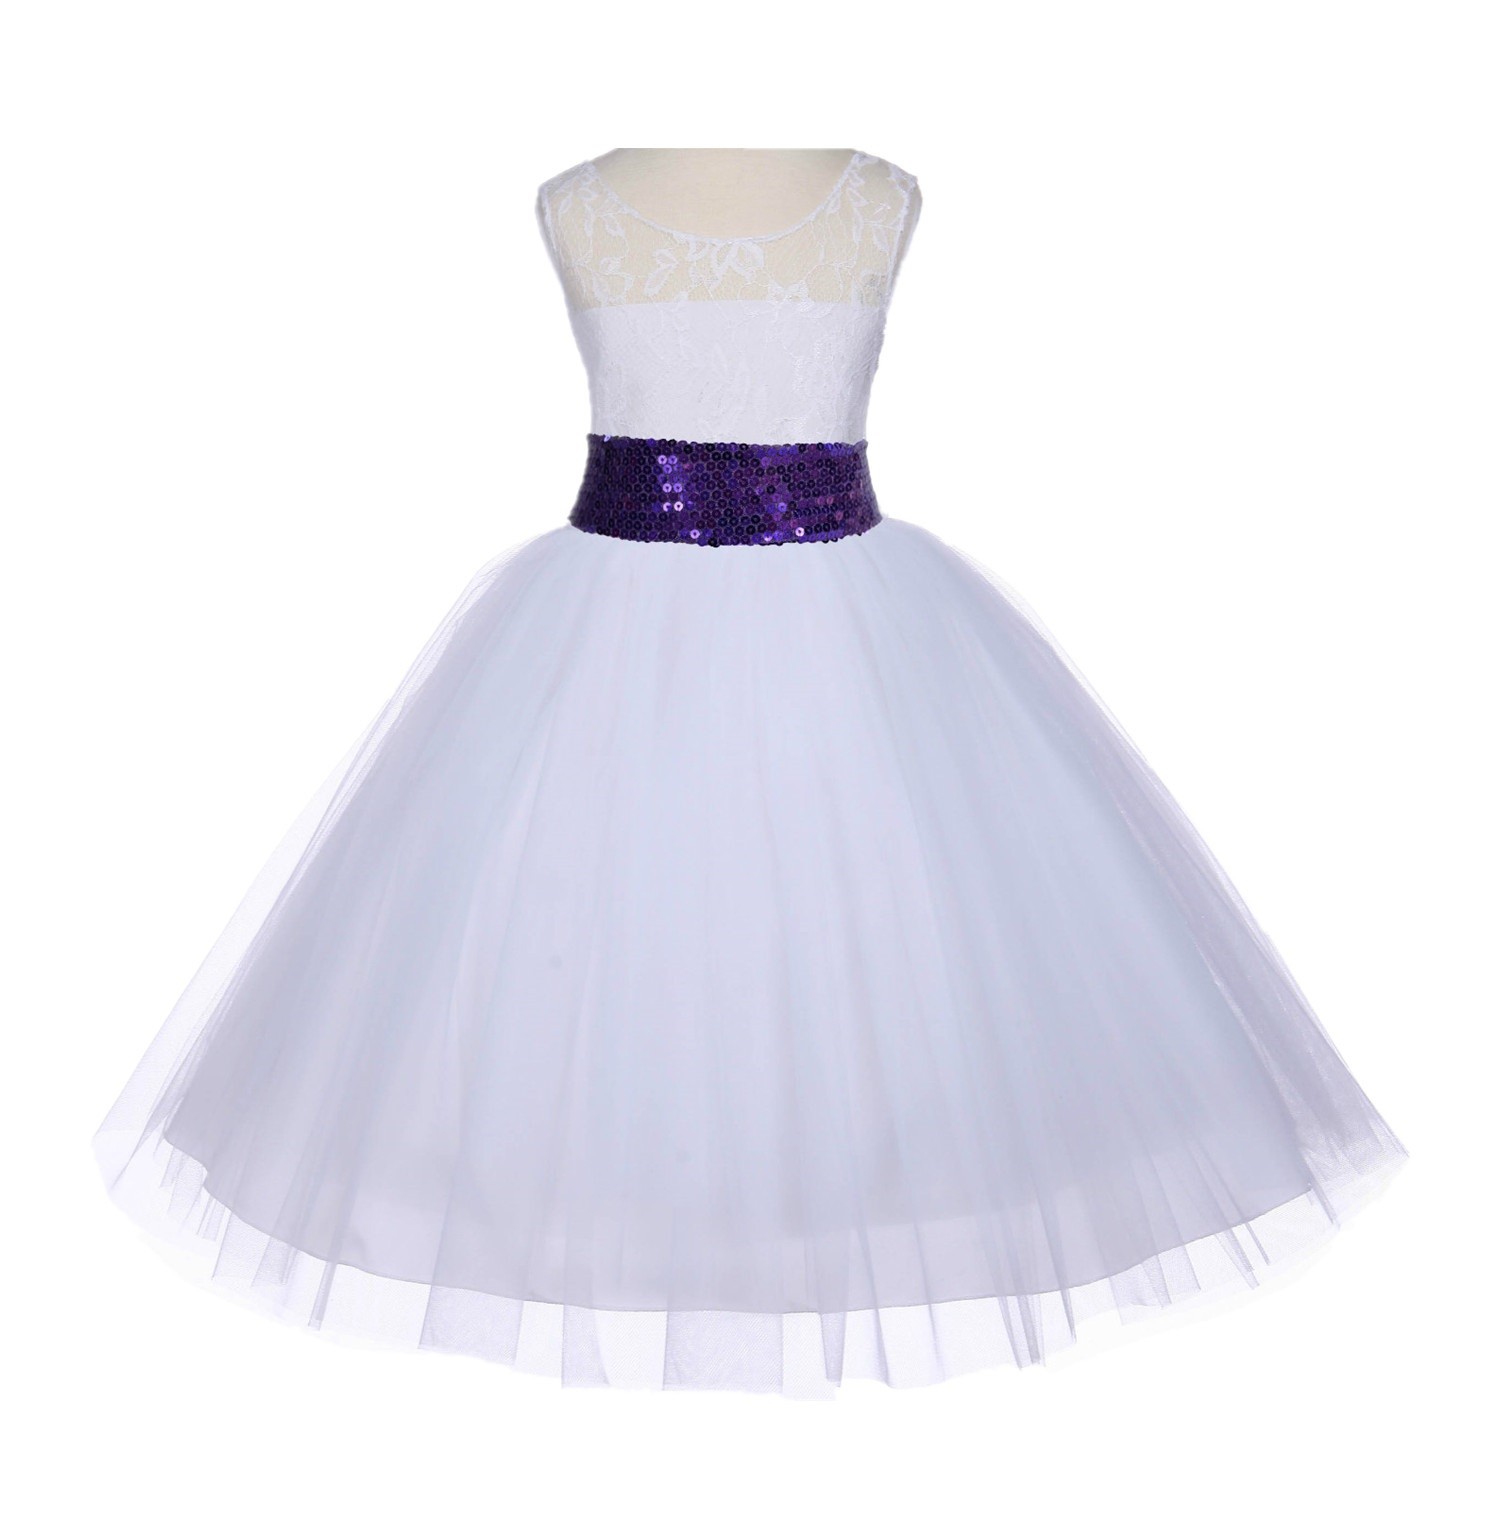 White Floral Lace Bodice Tulle Purple Sequin Flower Girl Dress 153mh